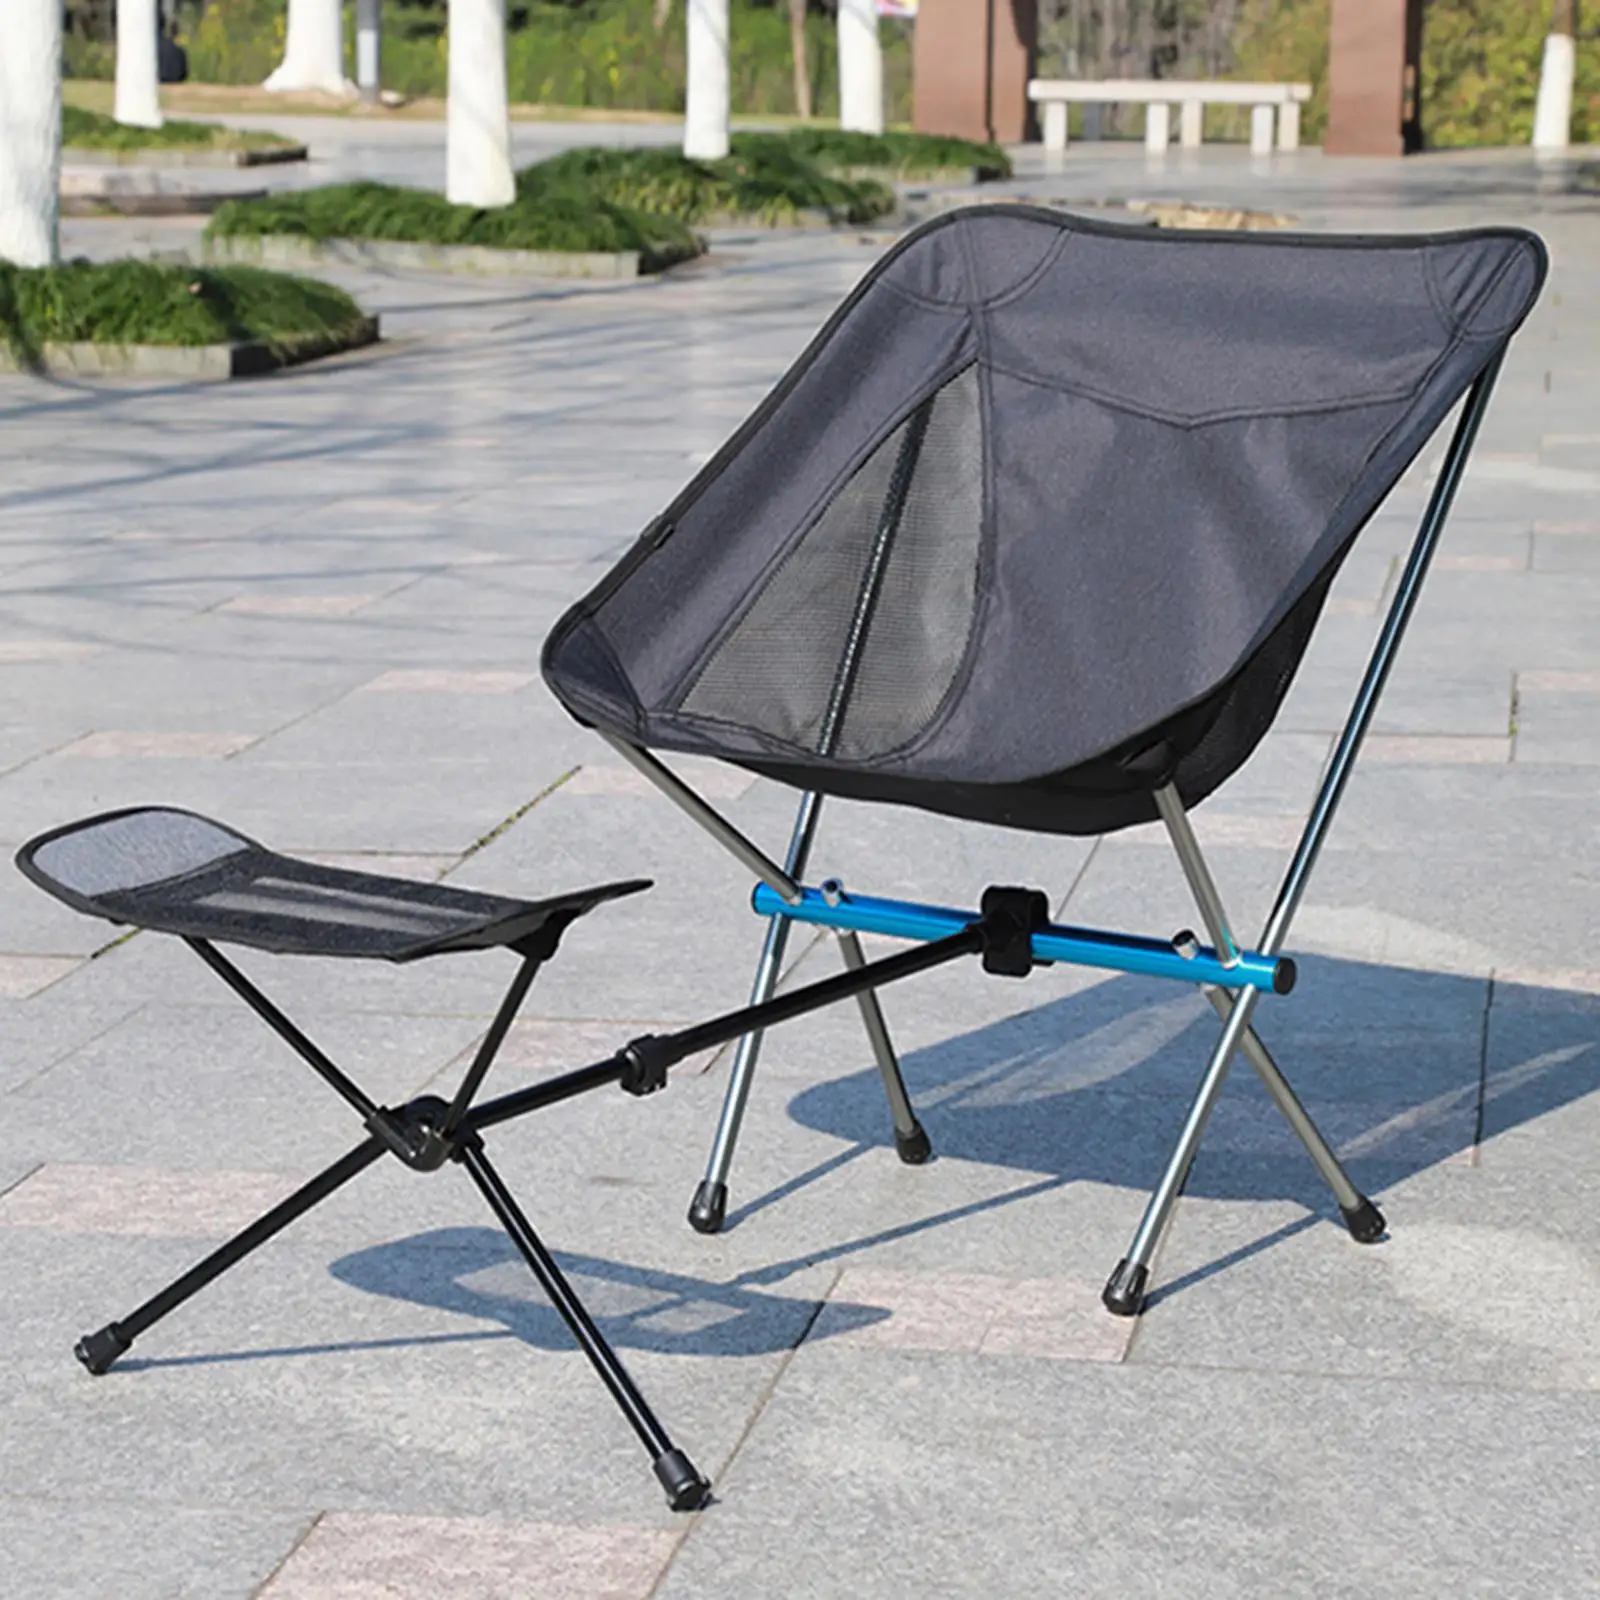 Folding Chair Footrest Foldable Chair Recliner Footstool Feet Lazy Foot Rest